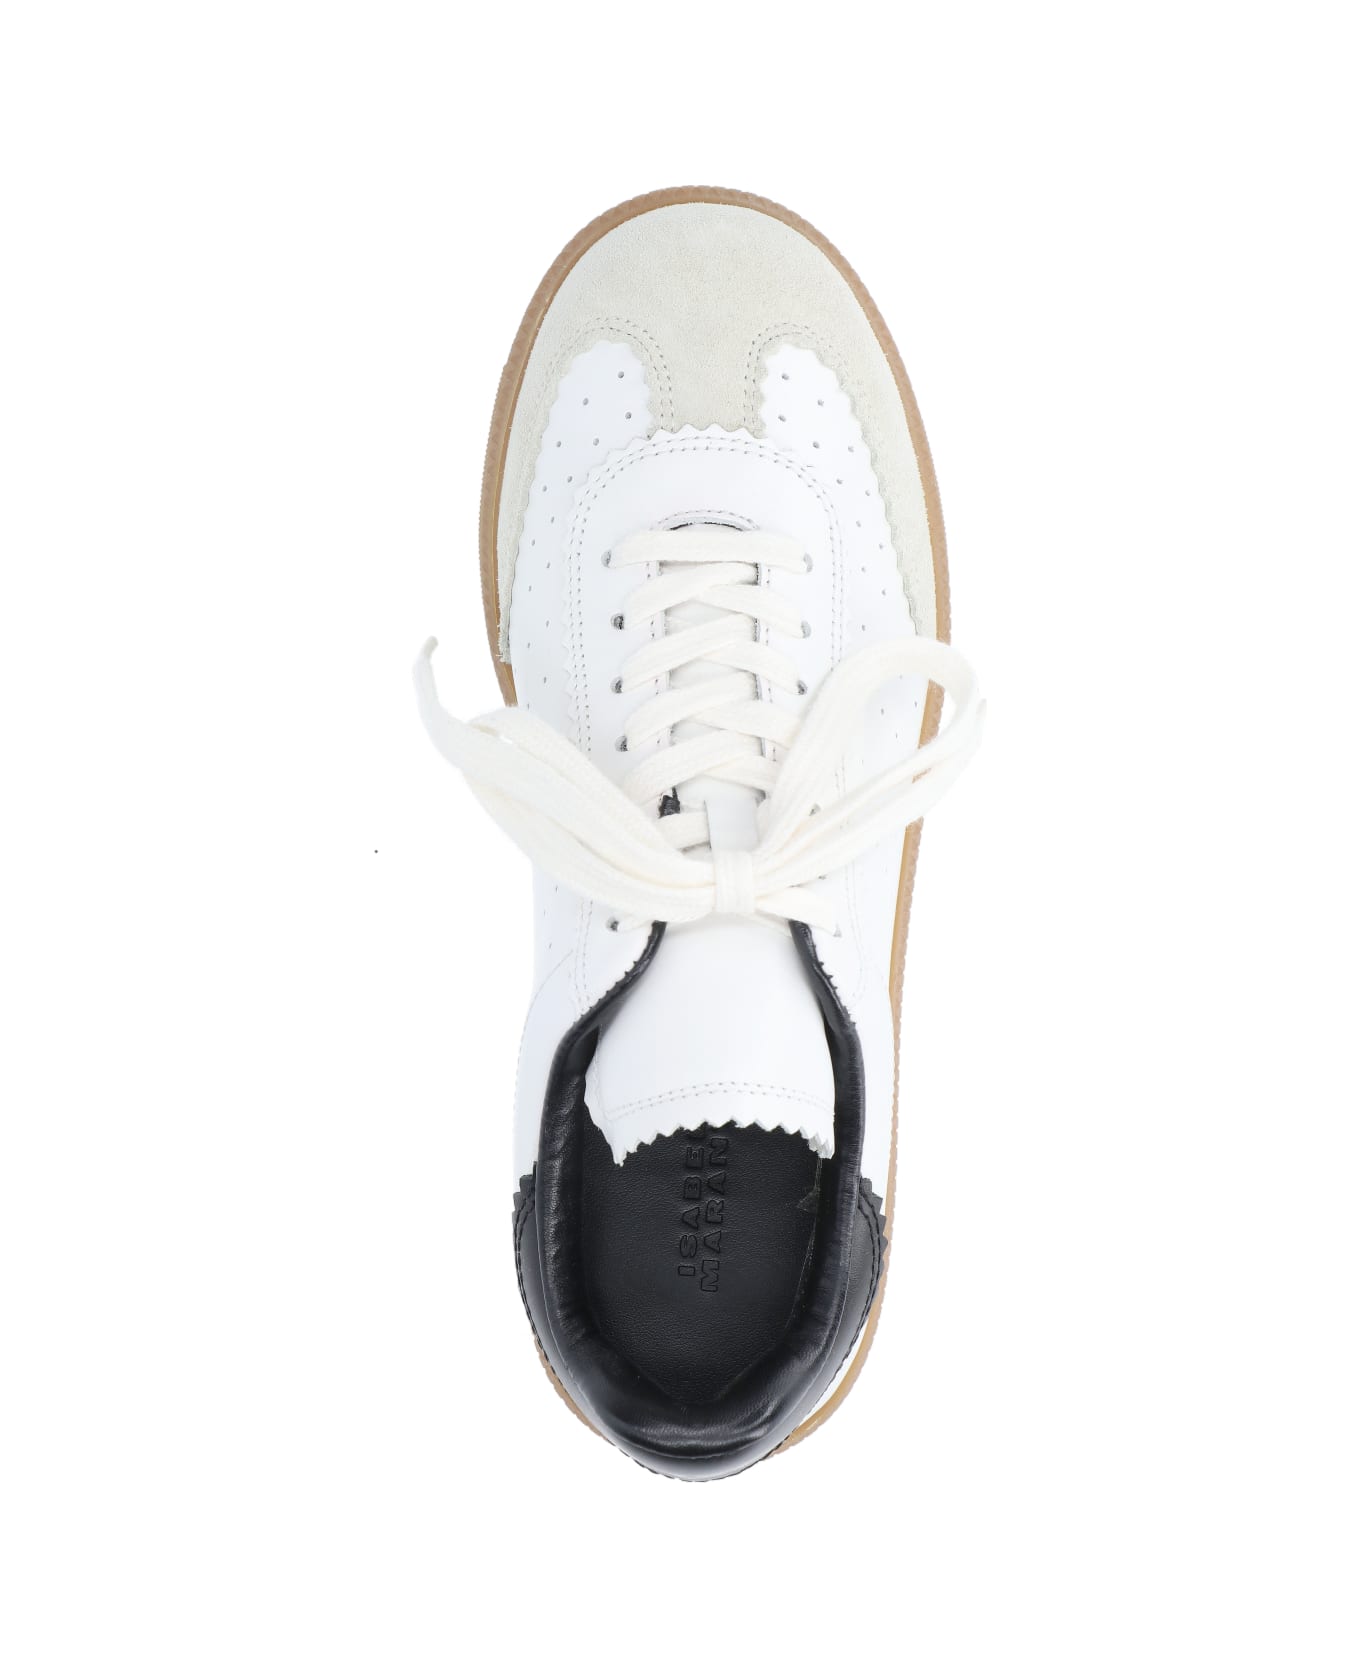 Isabel Marant Bryce Sneakers - Wh White